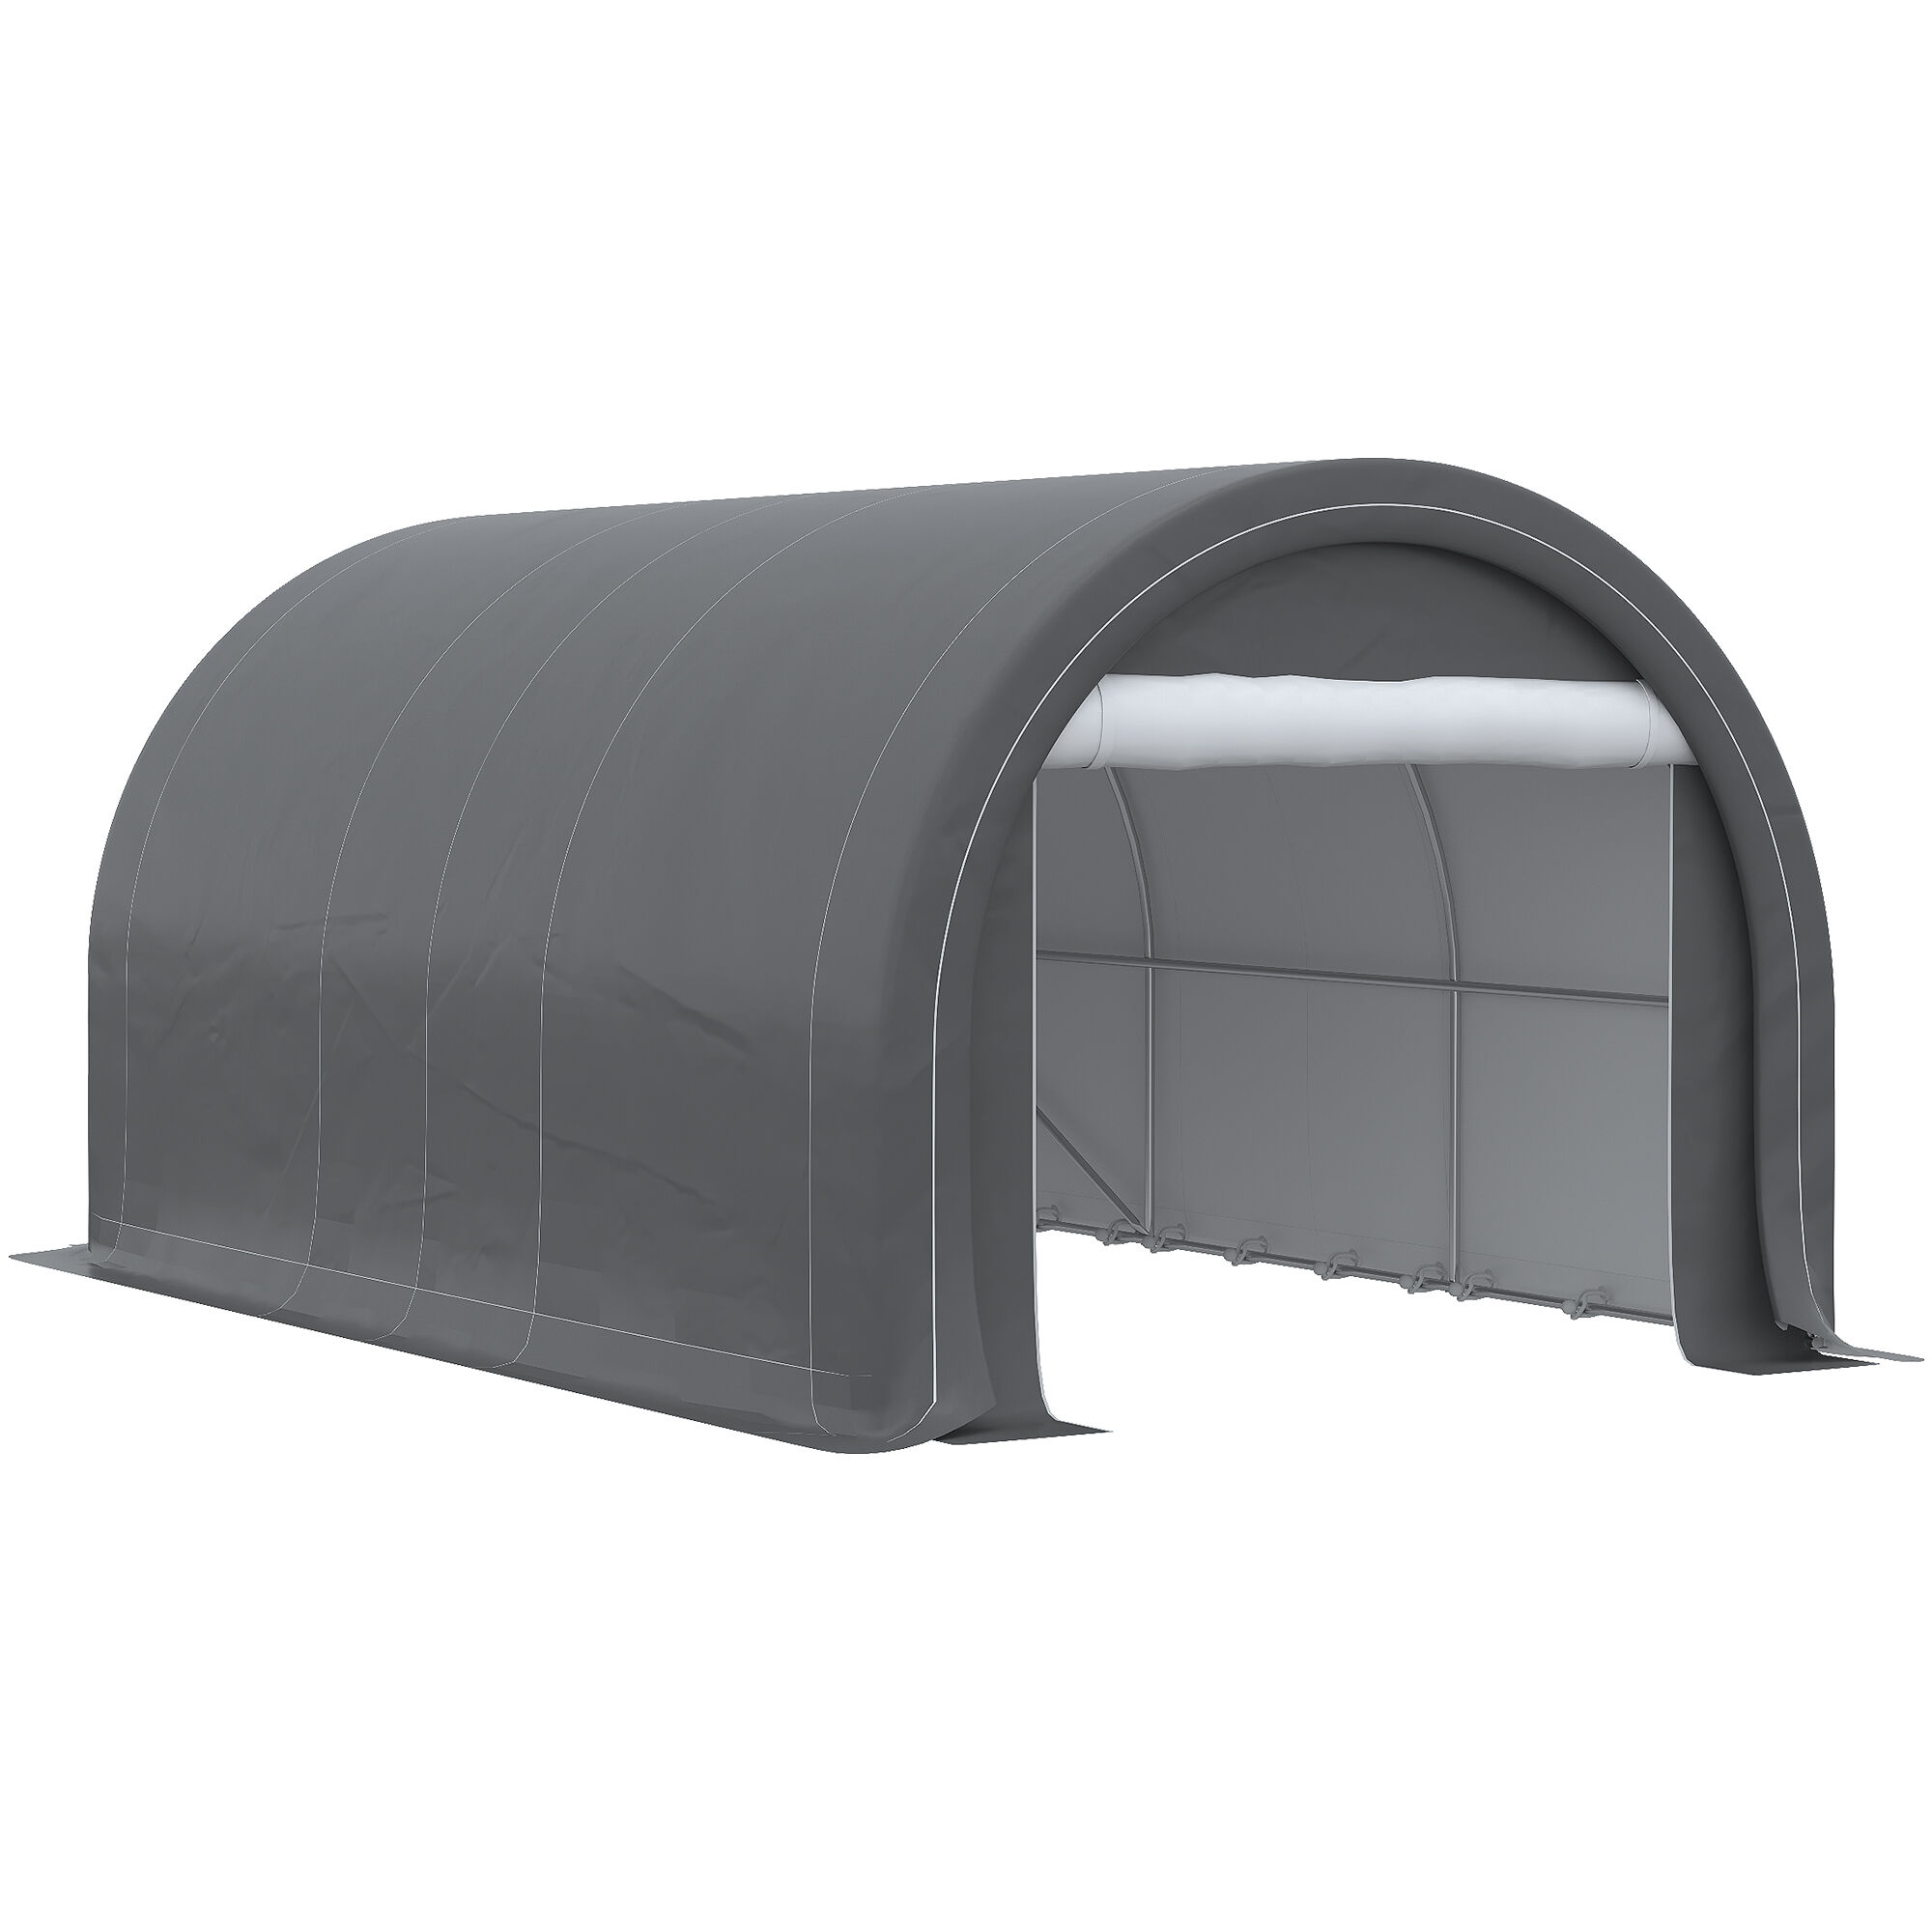 Outsunny 16' x 10' Carport, Heavy Duty Portable Garage / Storage Tent with Large Zippered Door, Anti-UV PE Canopy Cover for Car, Truck, Boat